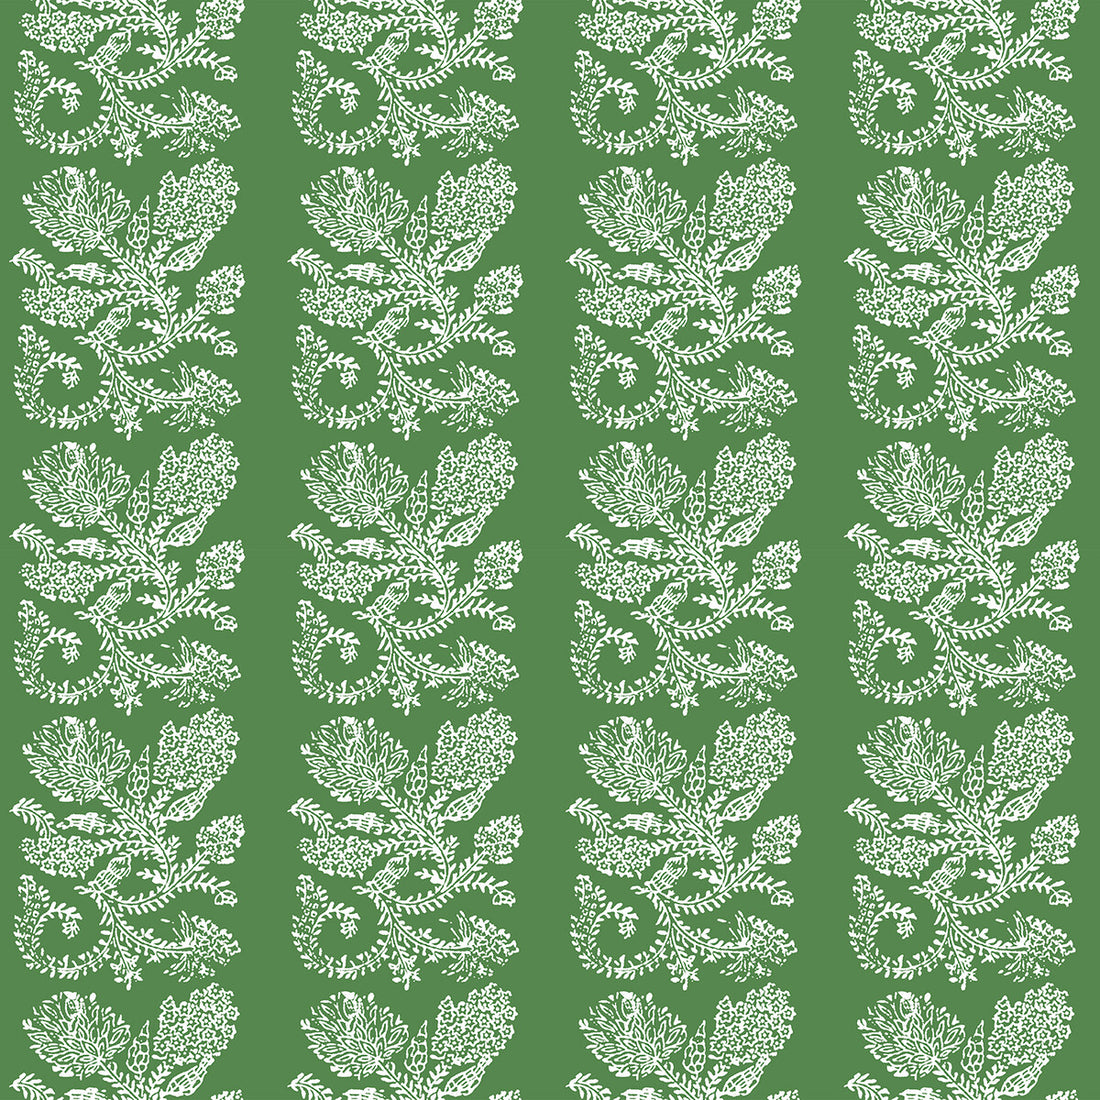 Camino fabric in verde color - pattern LCT1026.001.0 - by Gaston y Daniela in the Lorenzo Castillo V collection